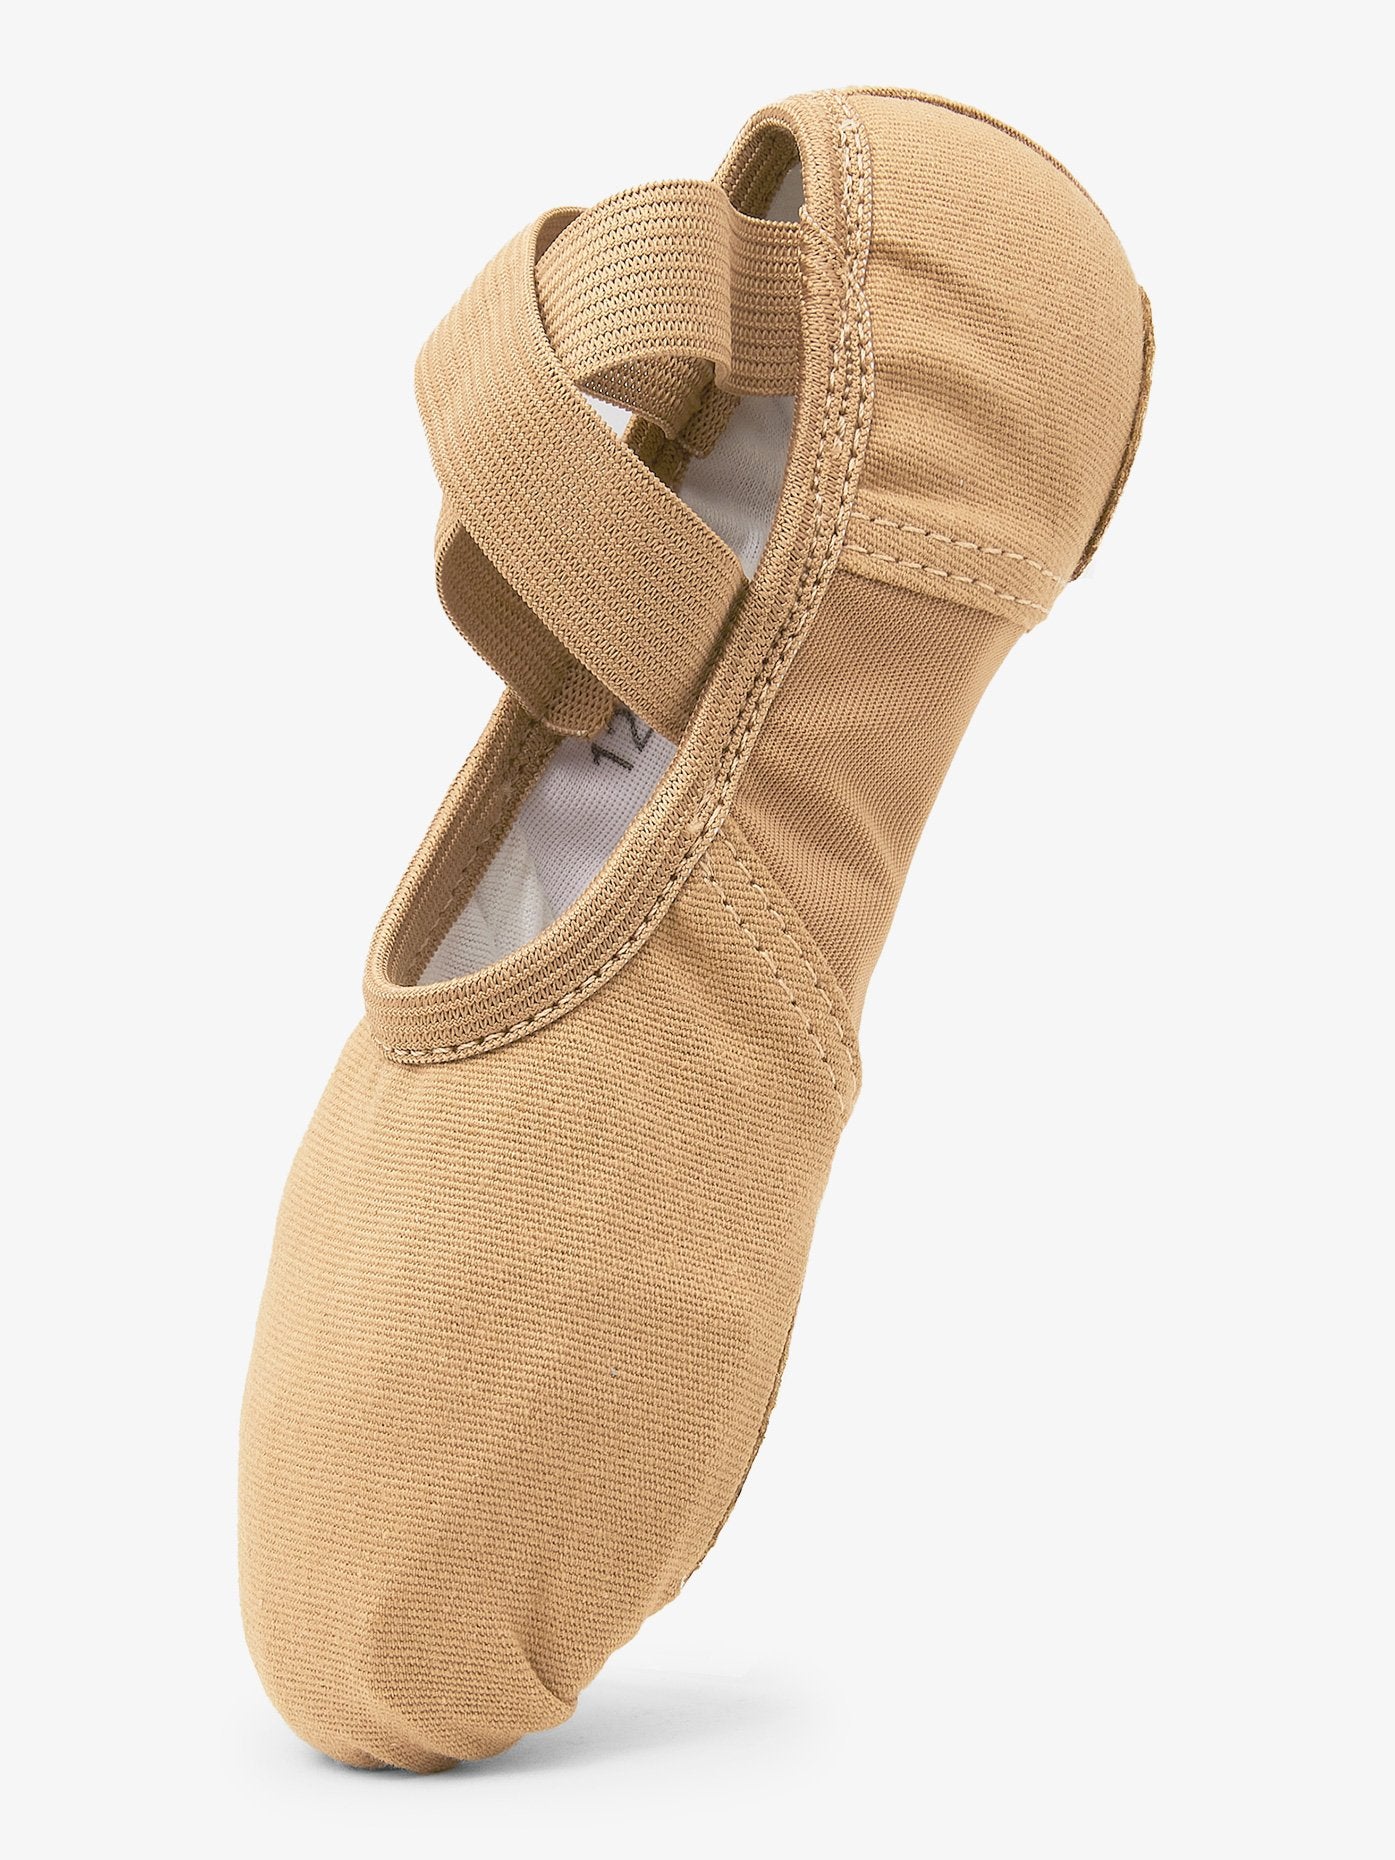 Girls' canvas tan ballet shoes with nylon spandex insert and split sole for enhanced flexibility and comfort